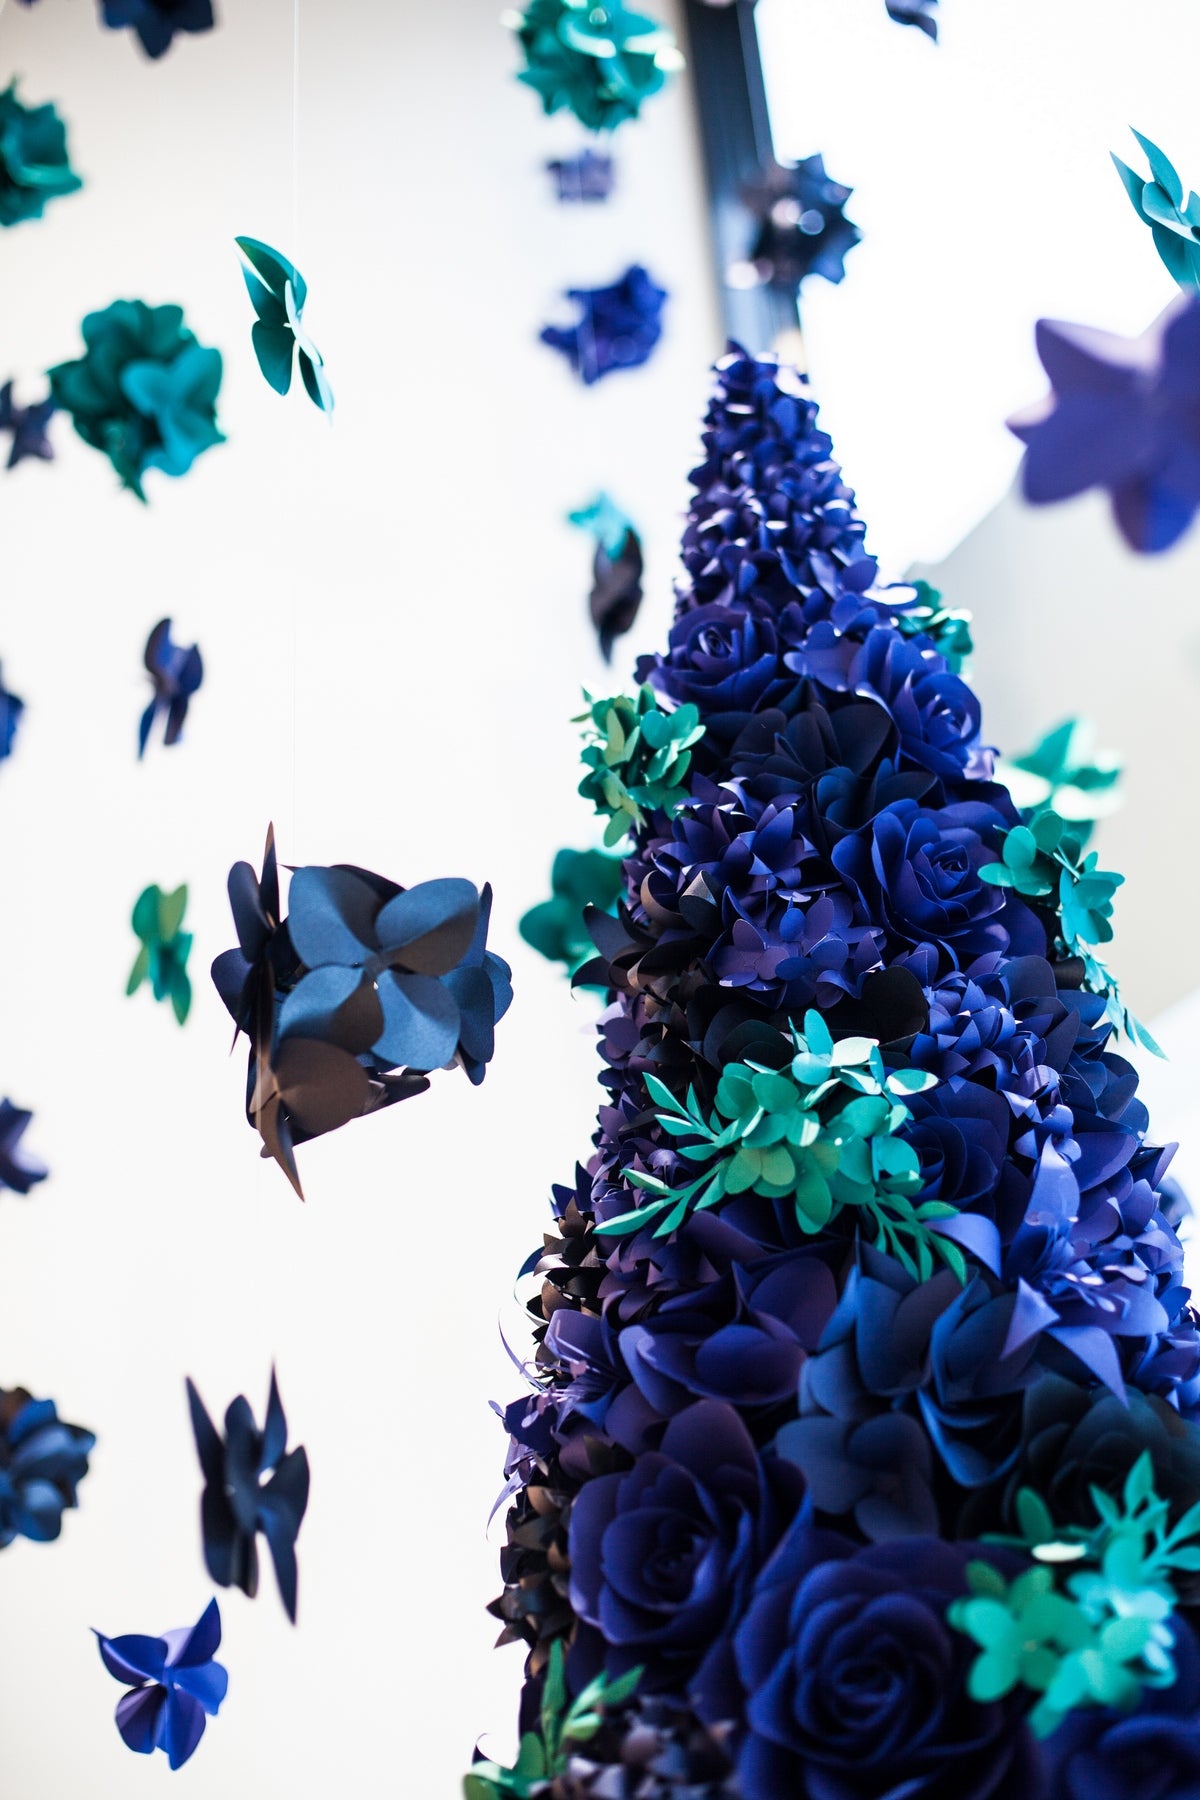 Mesmerizing installation of a paper flower Christmas tree, adorned with intricate ultramarine blue and turquoise blue paper flowers, evoking a sense of enchantment and joy during the holiday season.